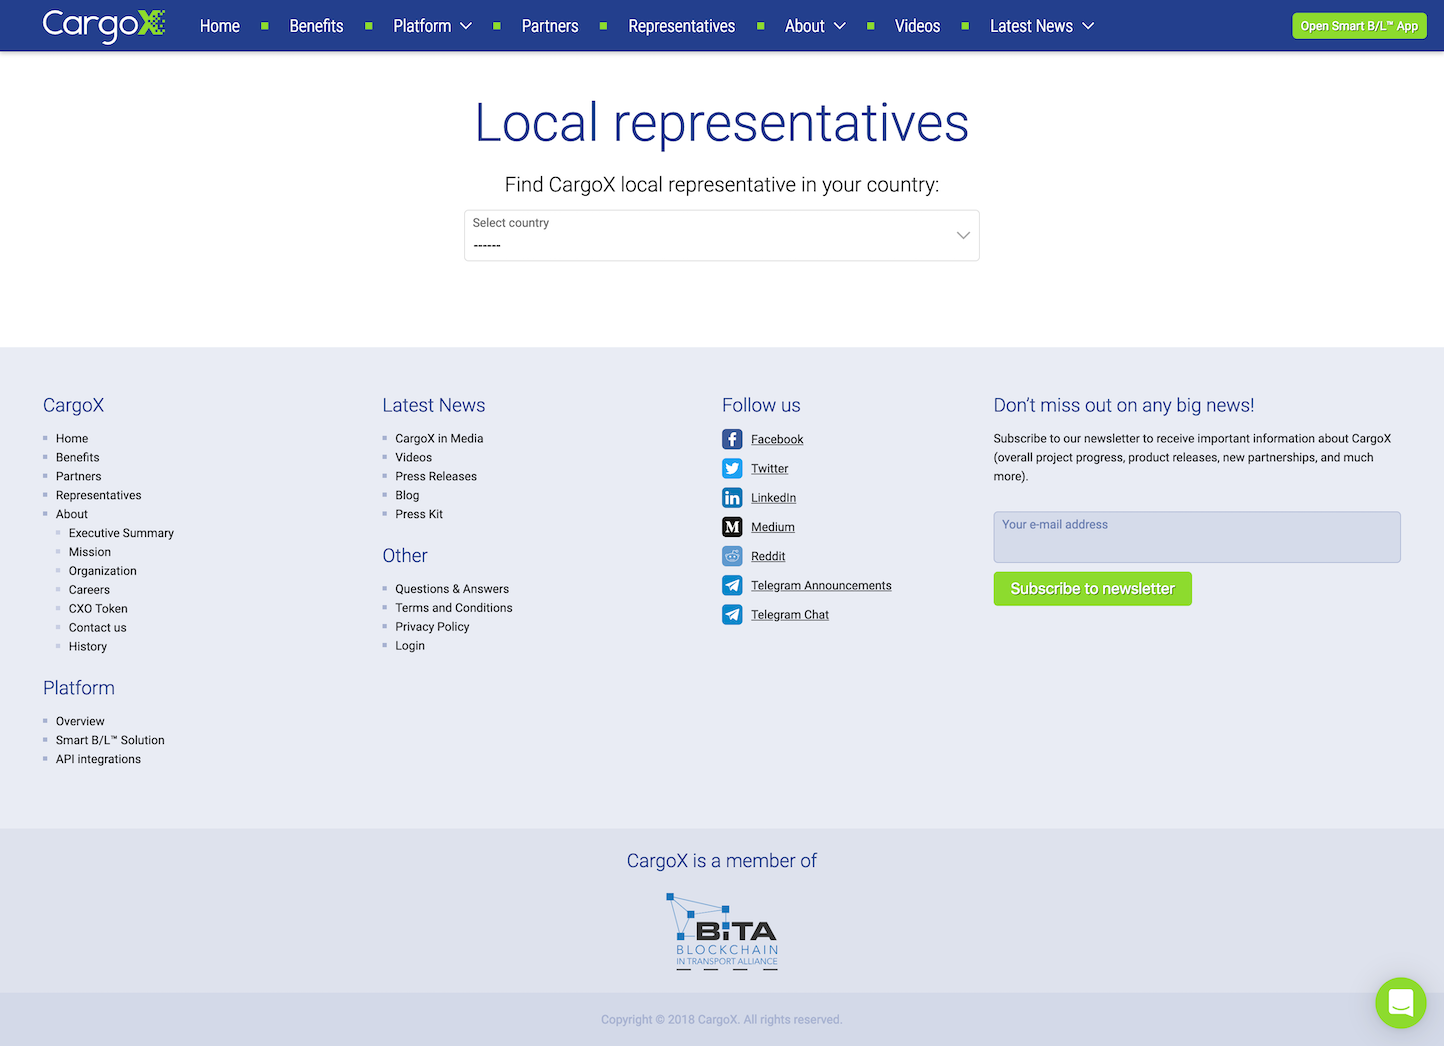 Screenshot of the Representatives page from the CargoX website.